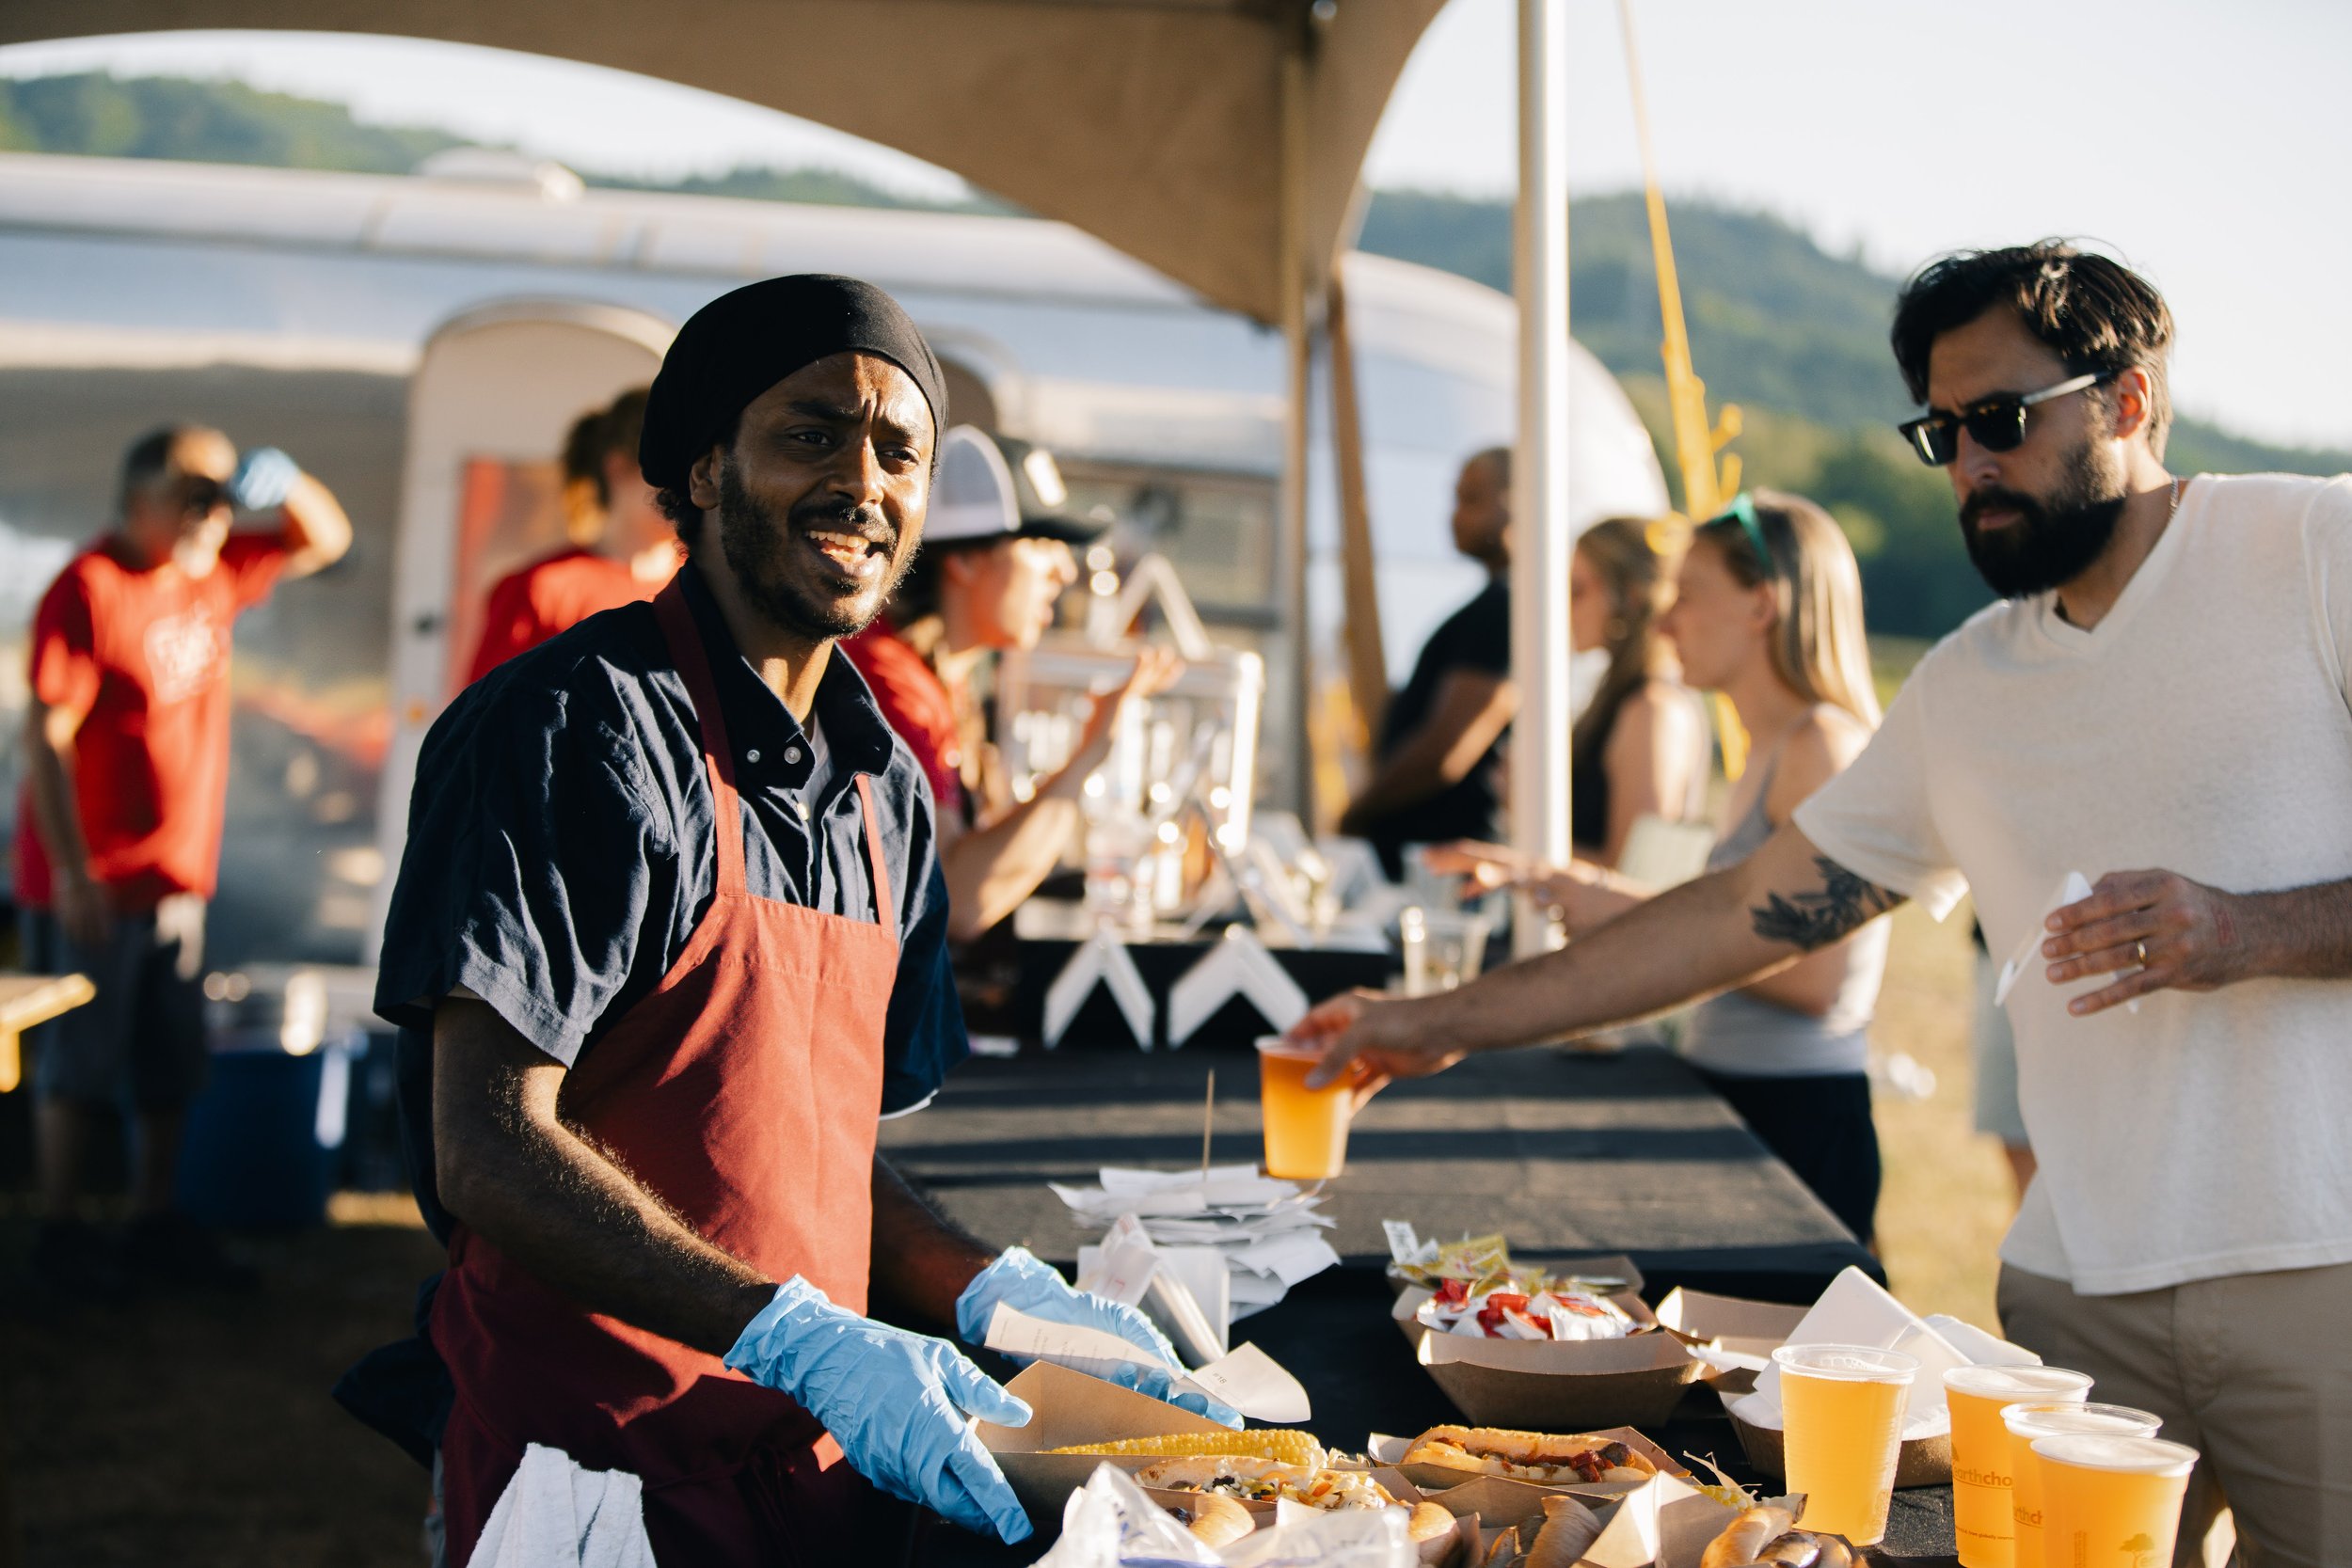  No hot dogs here! Chef Christian Ephrem made sure folks experienced food from the farm when they came to hear music. Burrata and arugula on grilled stone fruit, custom ground brats with beet sauerkraut, heirloom tomato salad with basil . . . and Far